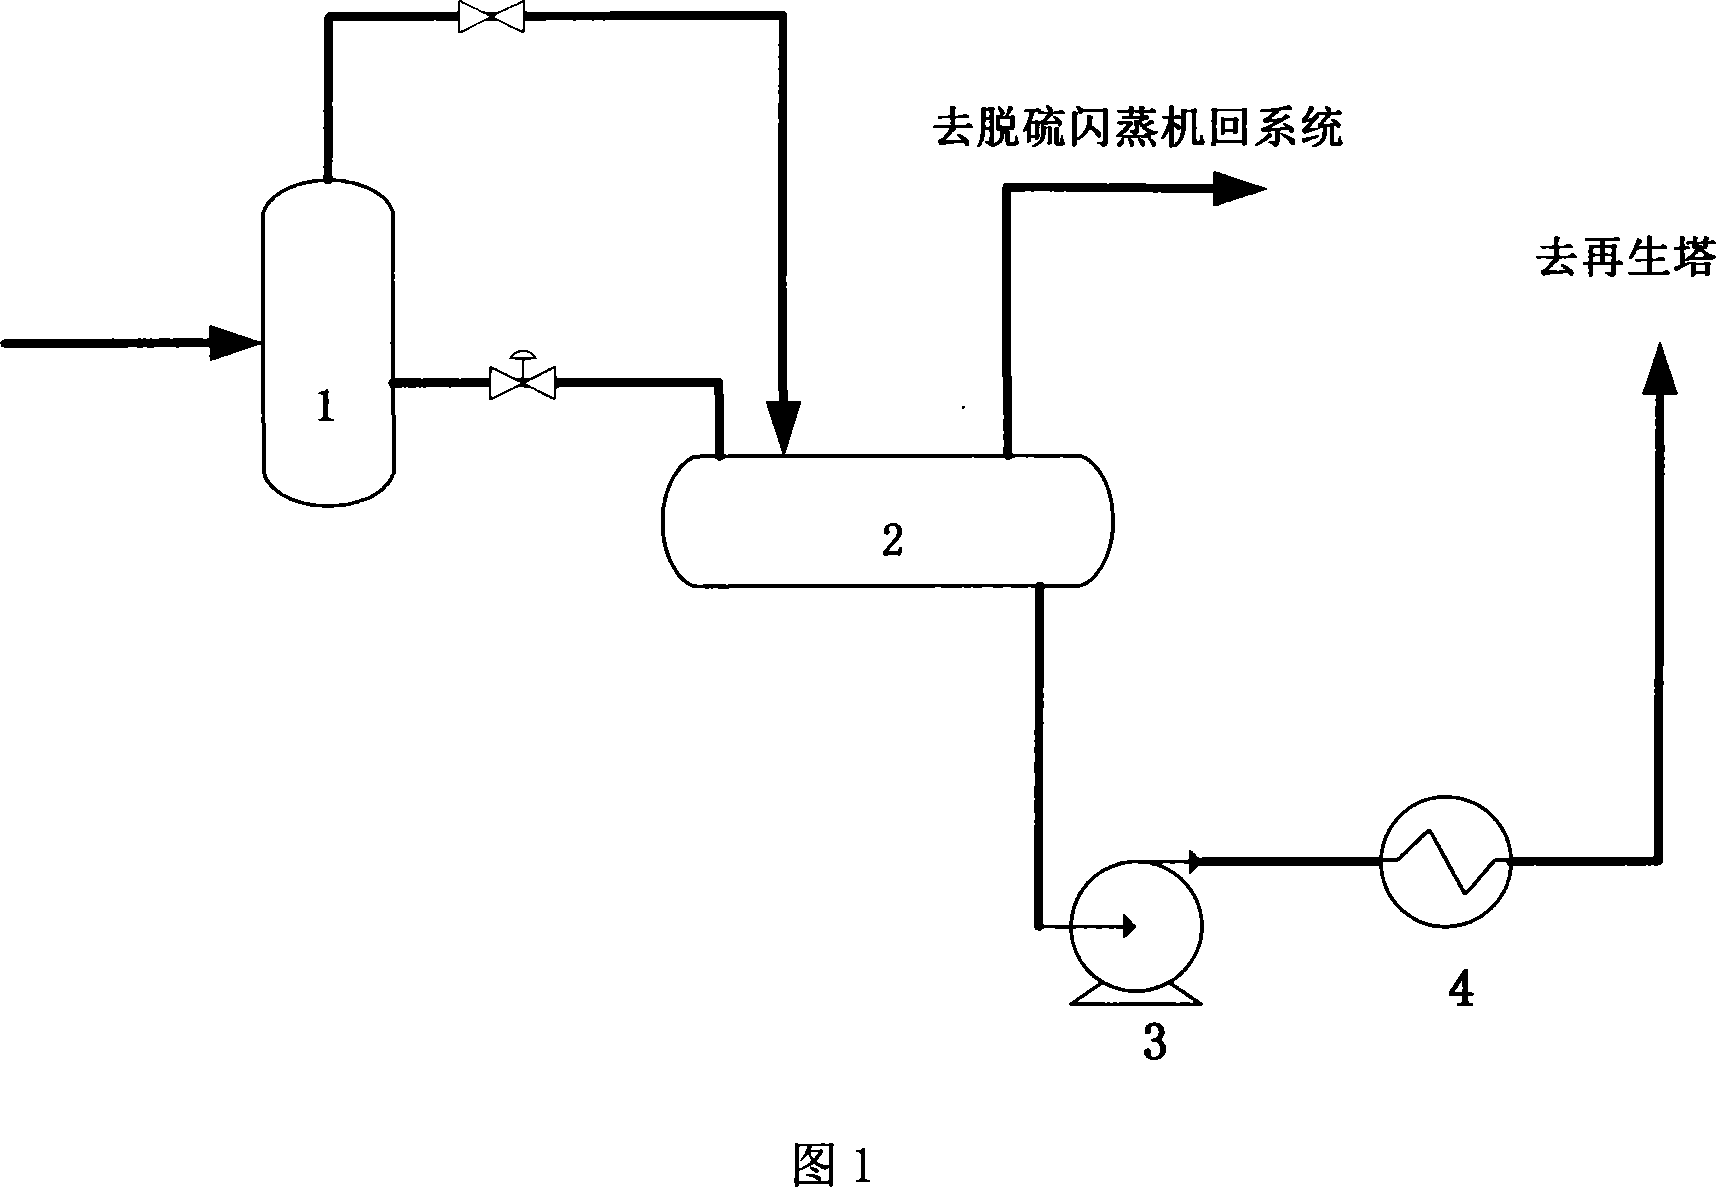 Polyethyleneglycol dimethyl ether desulfurizing system optimization extracting and concentrating technology